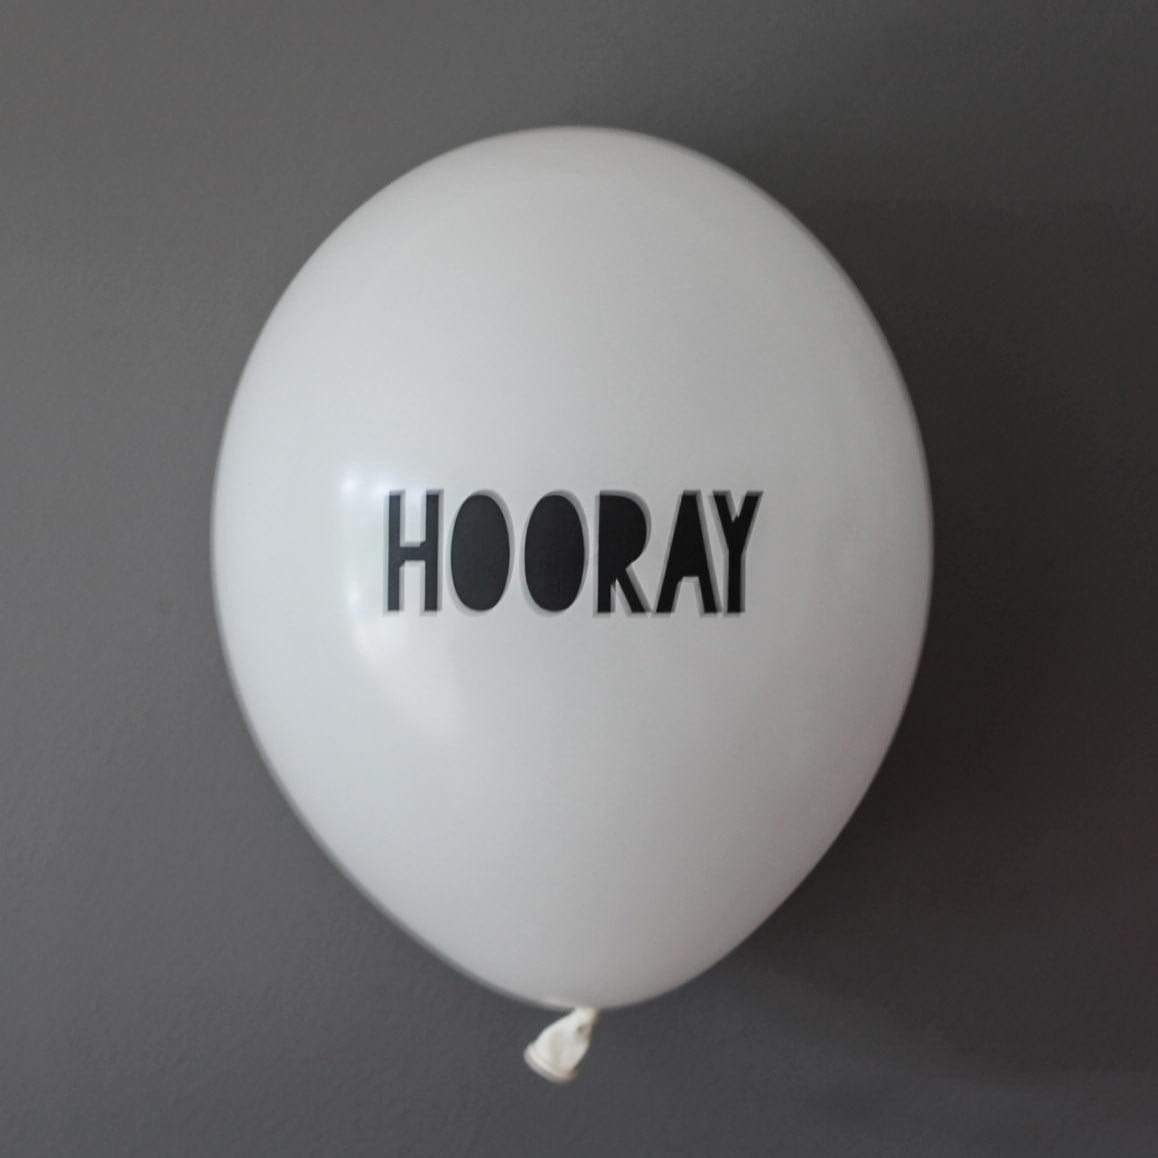 Hooray Balloons White | Boutique Balloons | Online Balloonery Pretty Little Party Shop